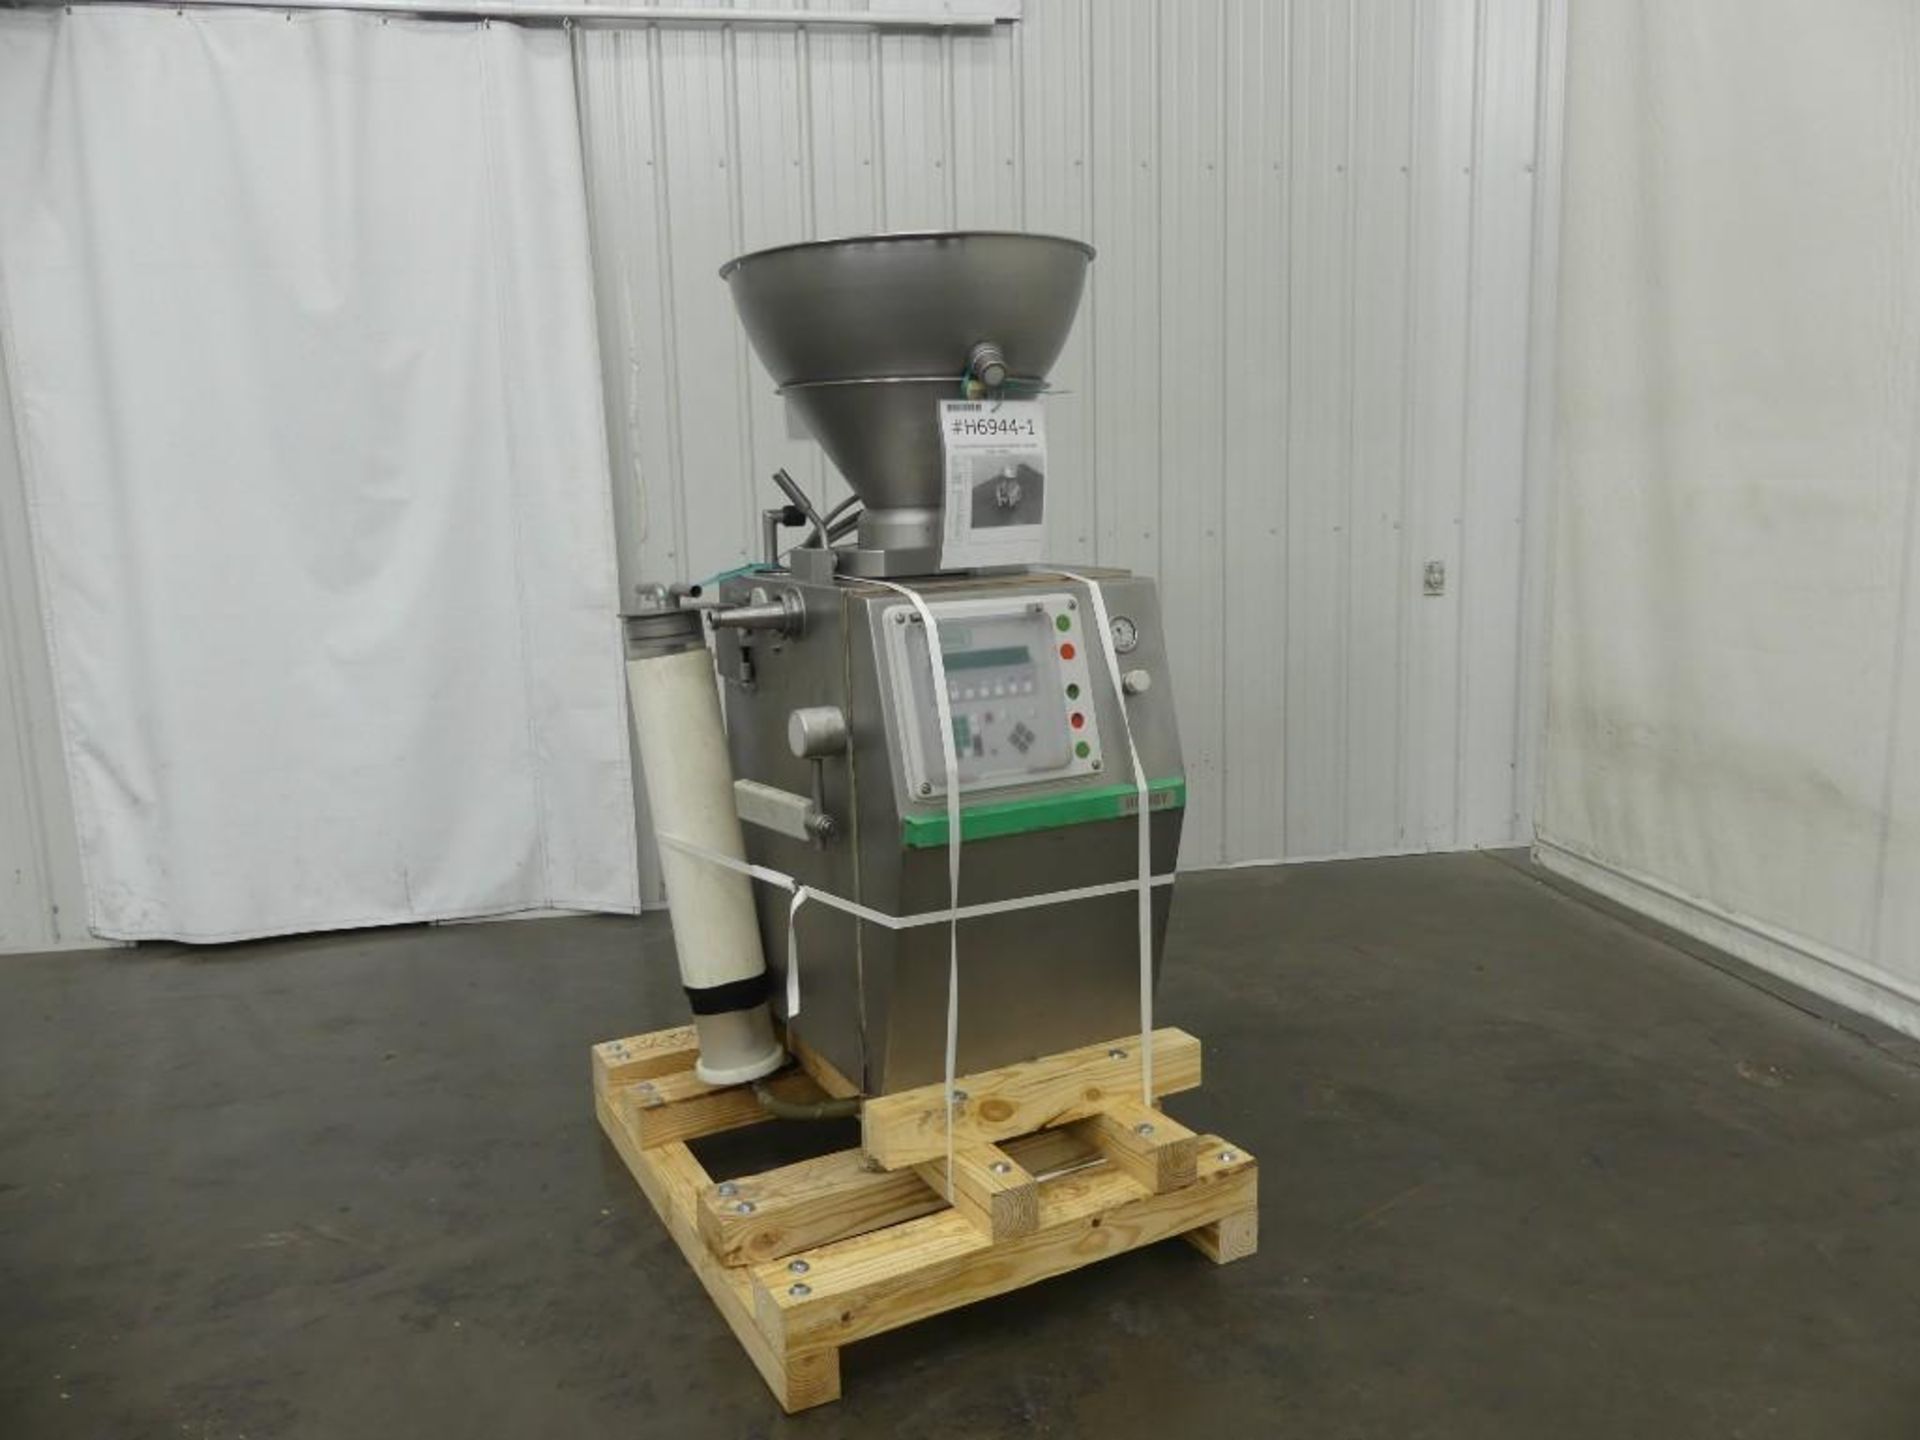 Vemag Robby Stainless Steel Vacuum Extruder - Image 24 of 24